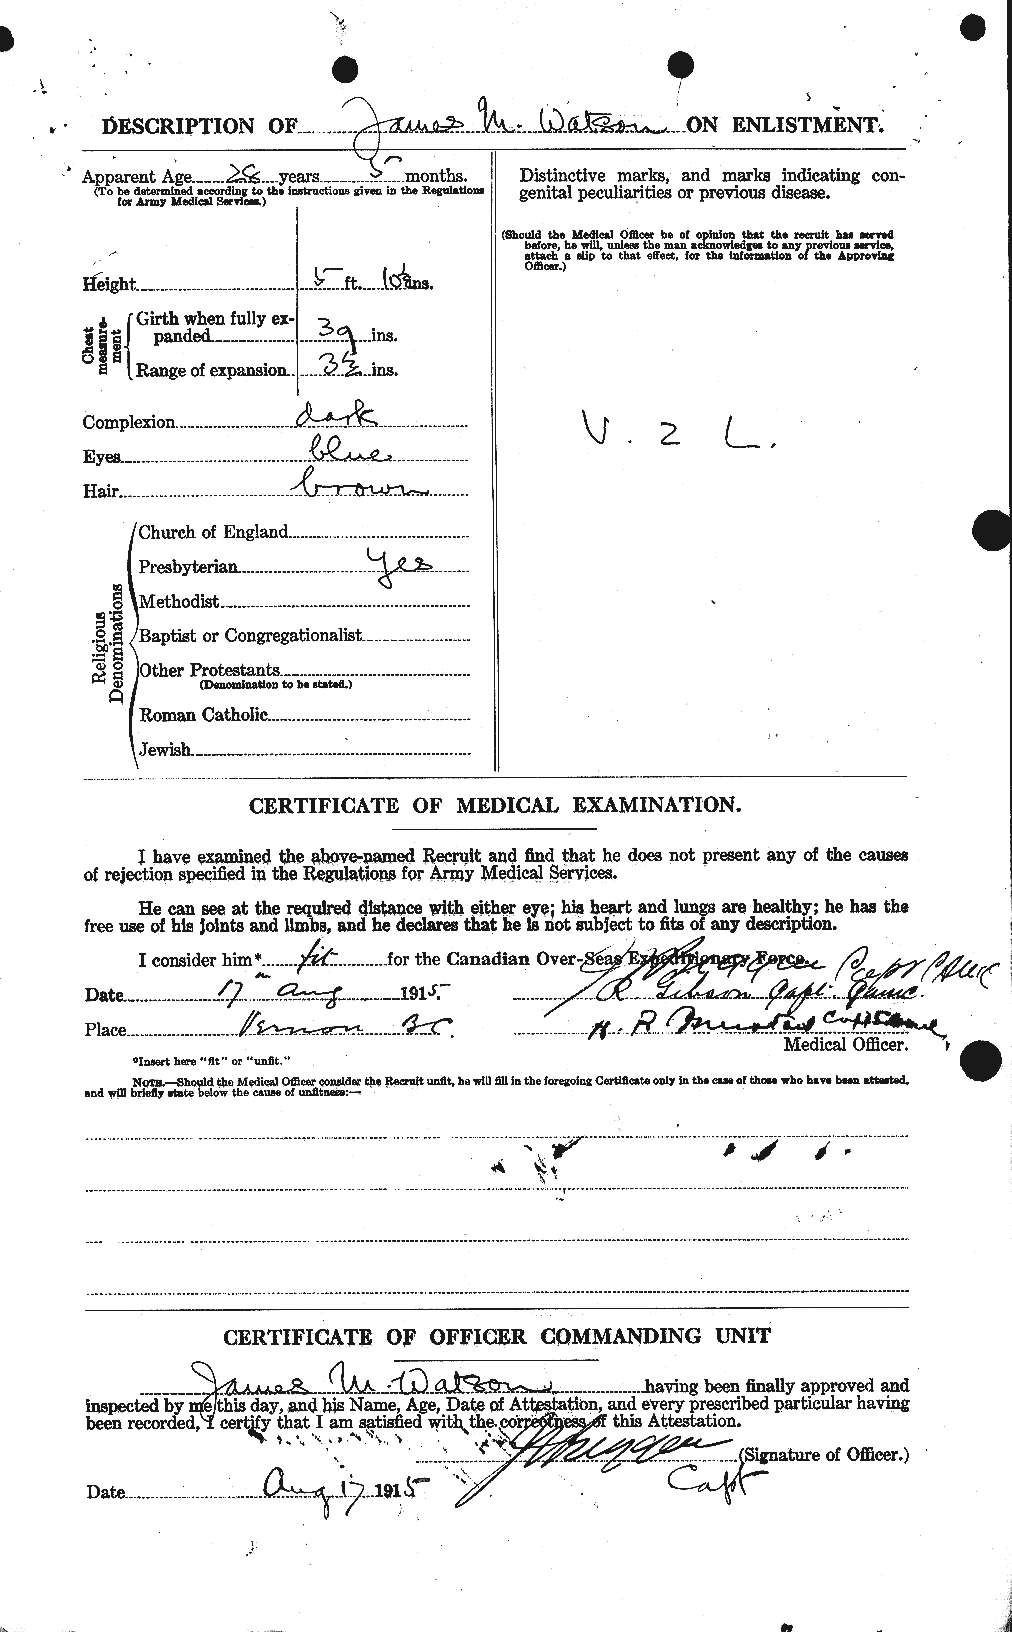 Personnel Records of the First World War - CEF 658967b